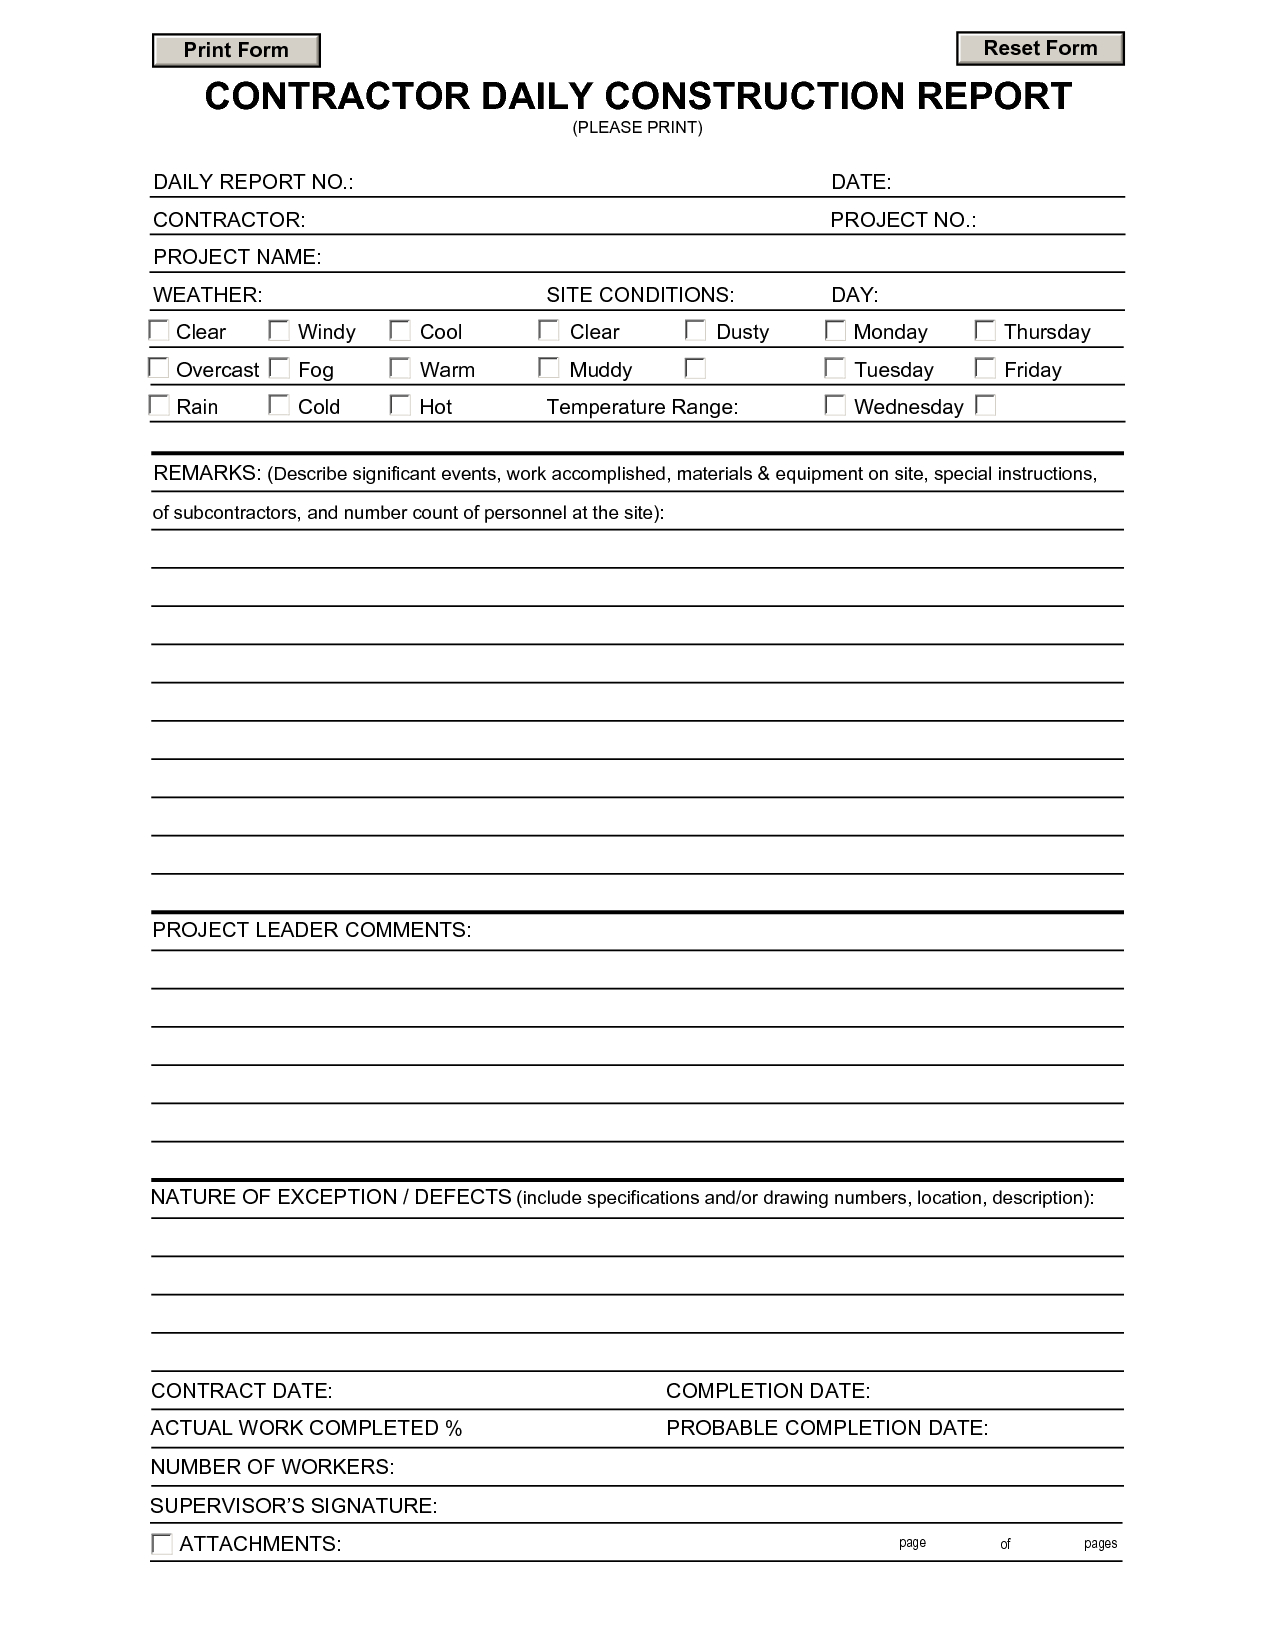 Construction Daily Report Template | Contractors | Report Inside Free Construction Daily Report Template